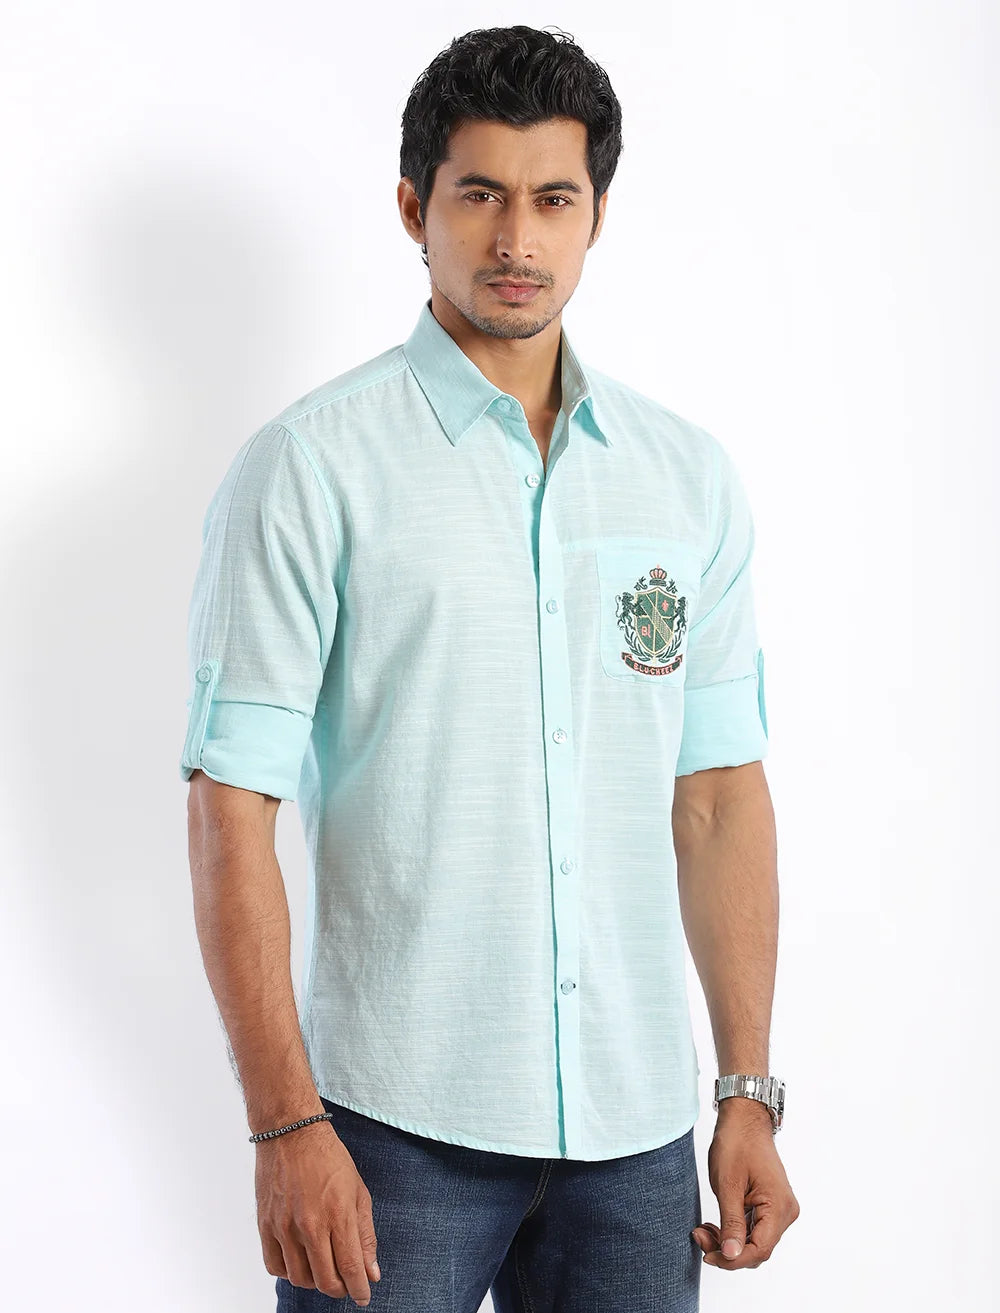 Men’s Limited Edition Casual Shirt